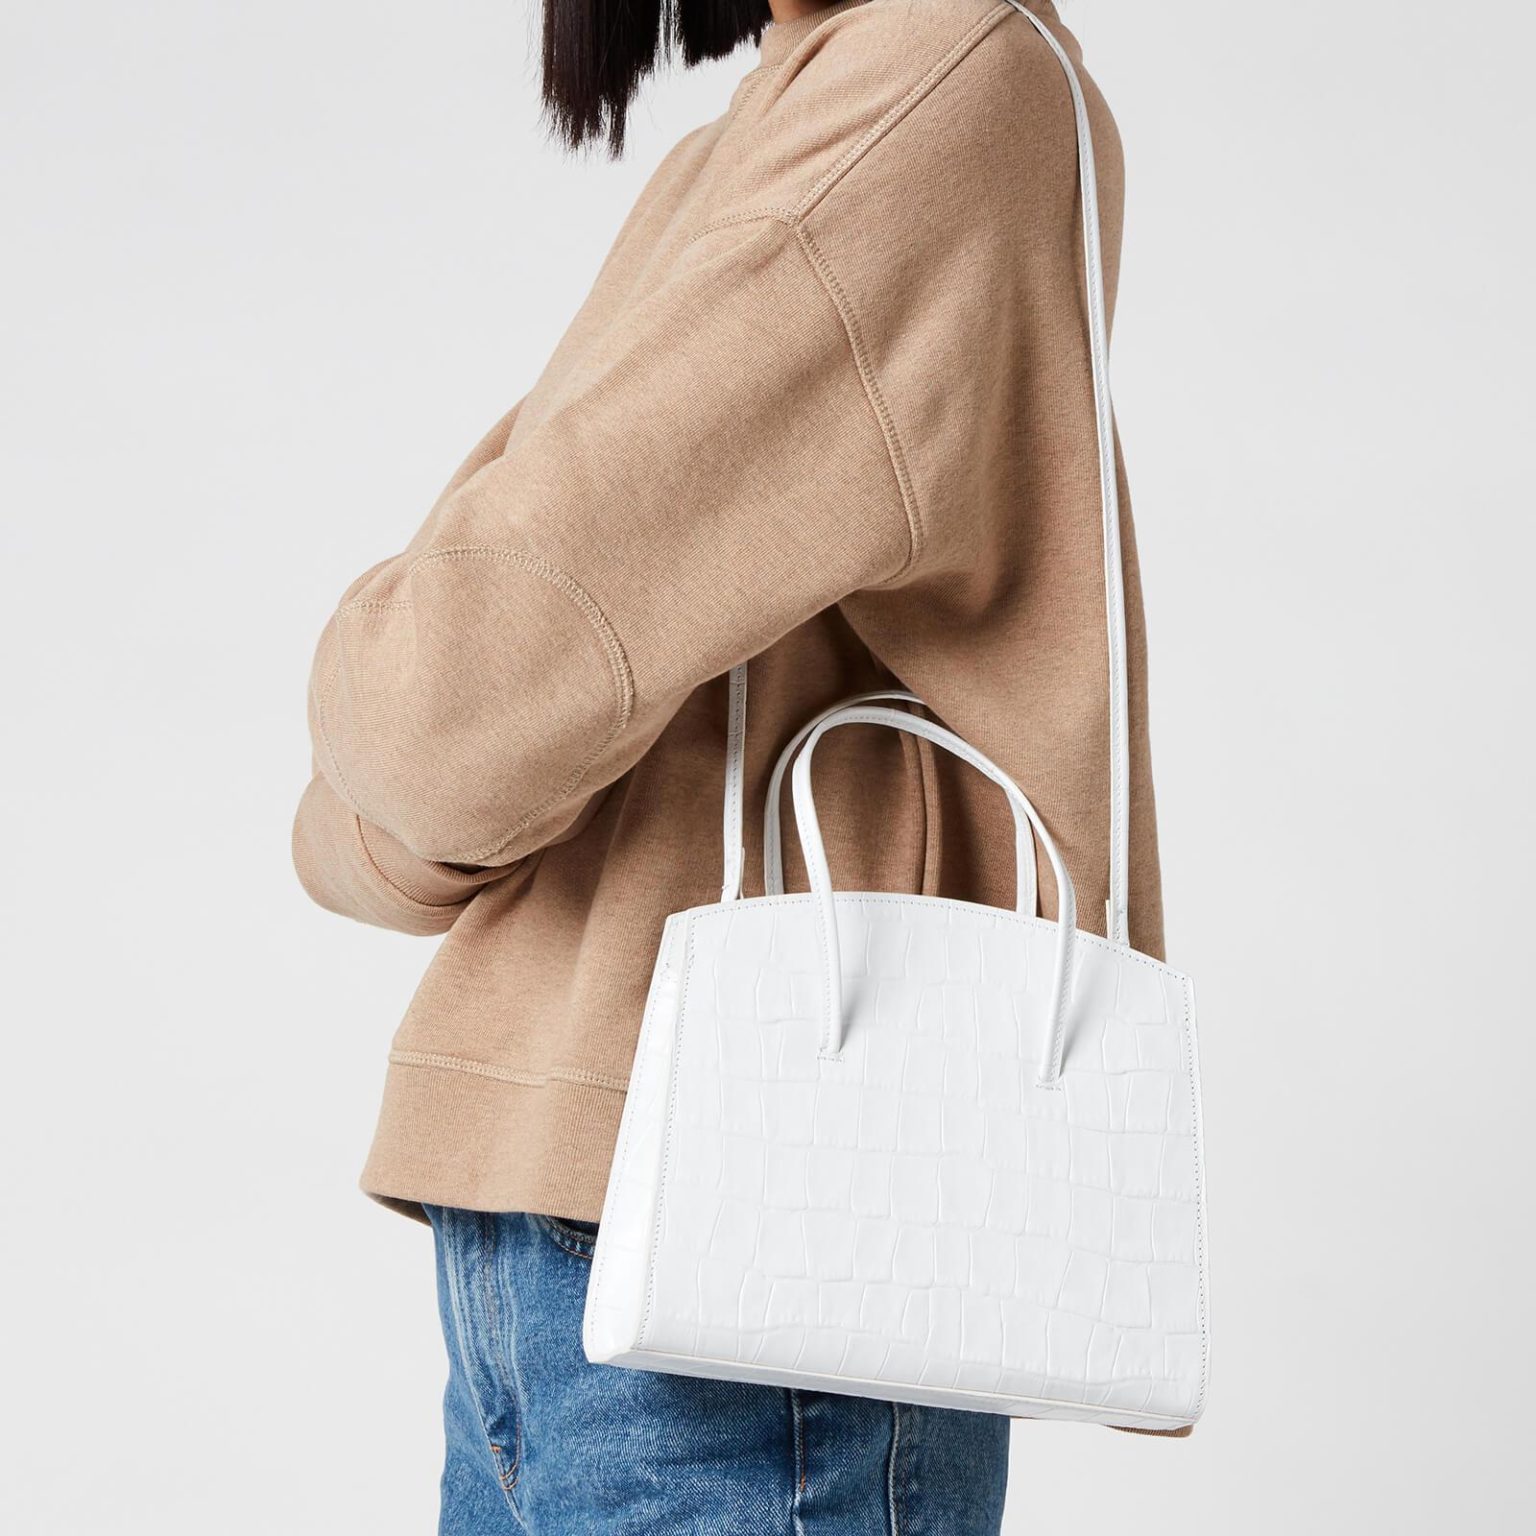 Top 10 Bag Trends Expected To Boom In 2021/2022